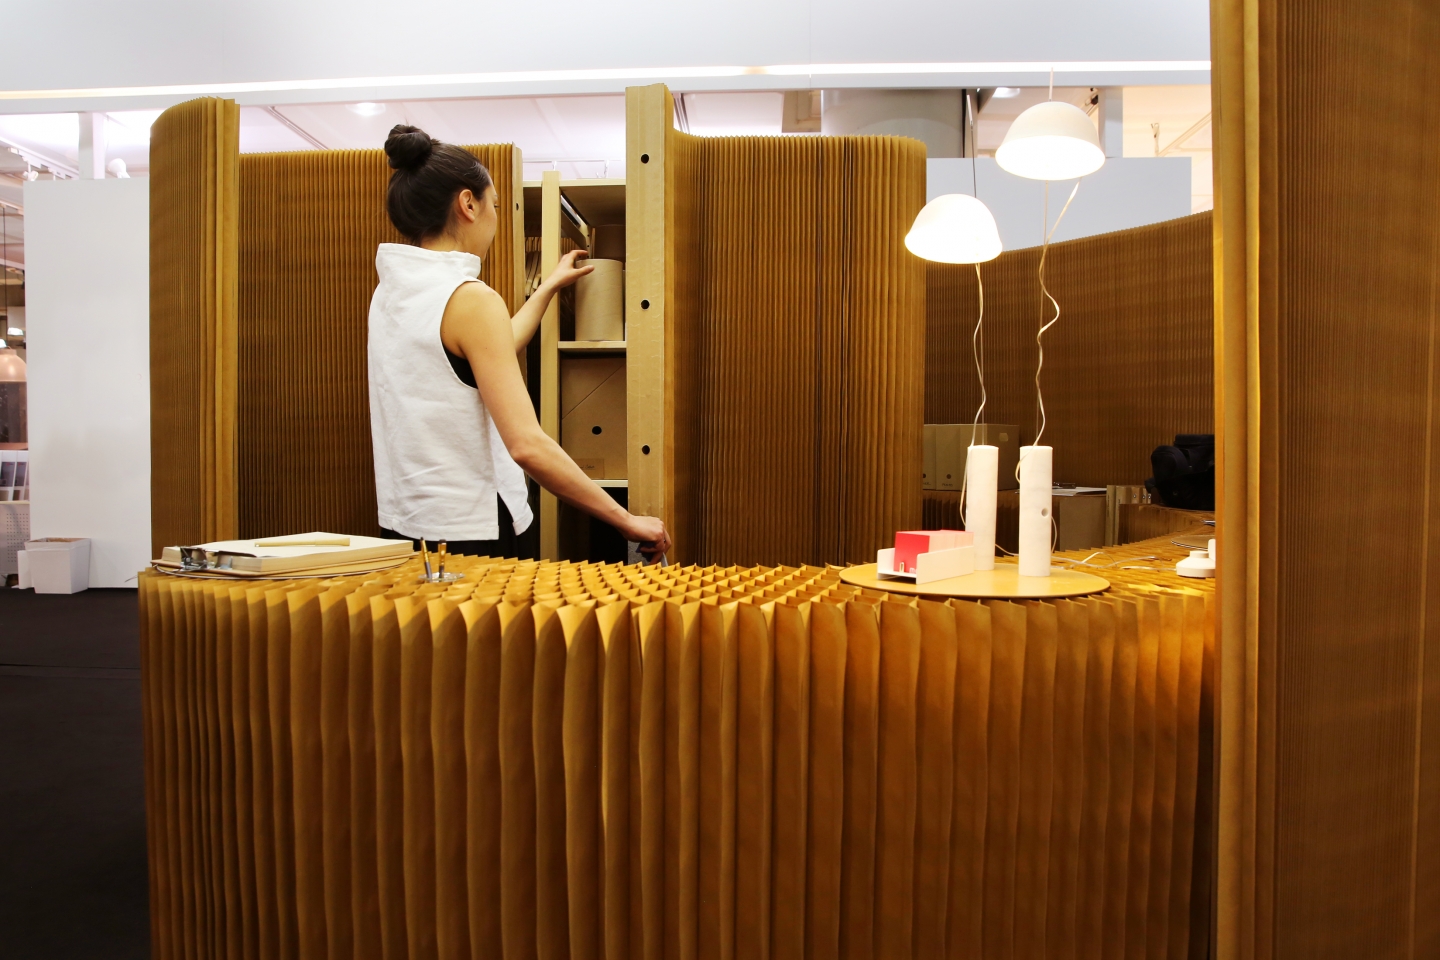 cappello lamps, thinwall / acoustic wall liner and cabinet enclosure by molo - a molo employee retrieves materials from inside a thinwall closet